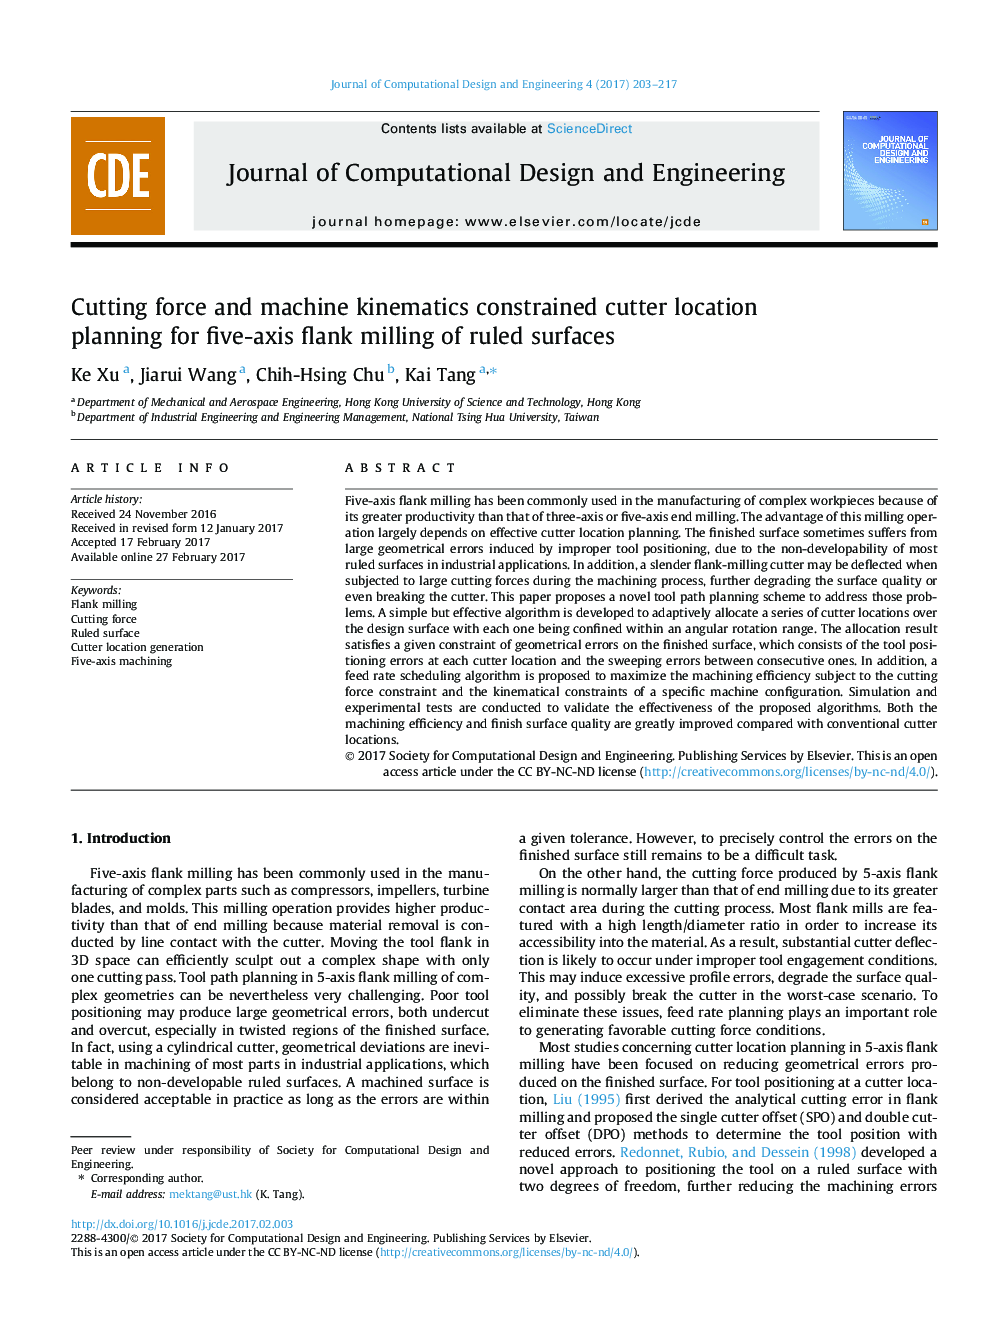 Cutting force and machine kinematics constrained cutter location planning for five-axis flank milling of ruled surfaces